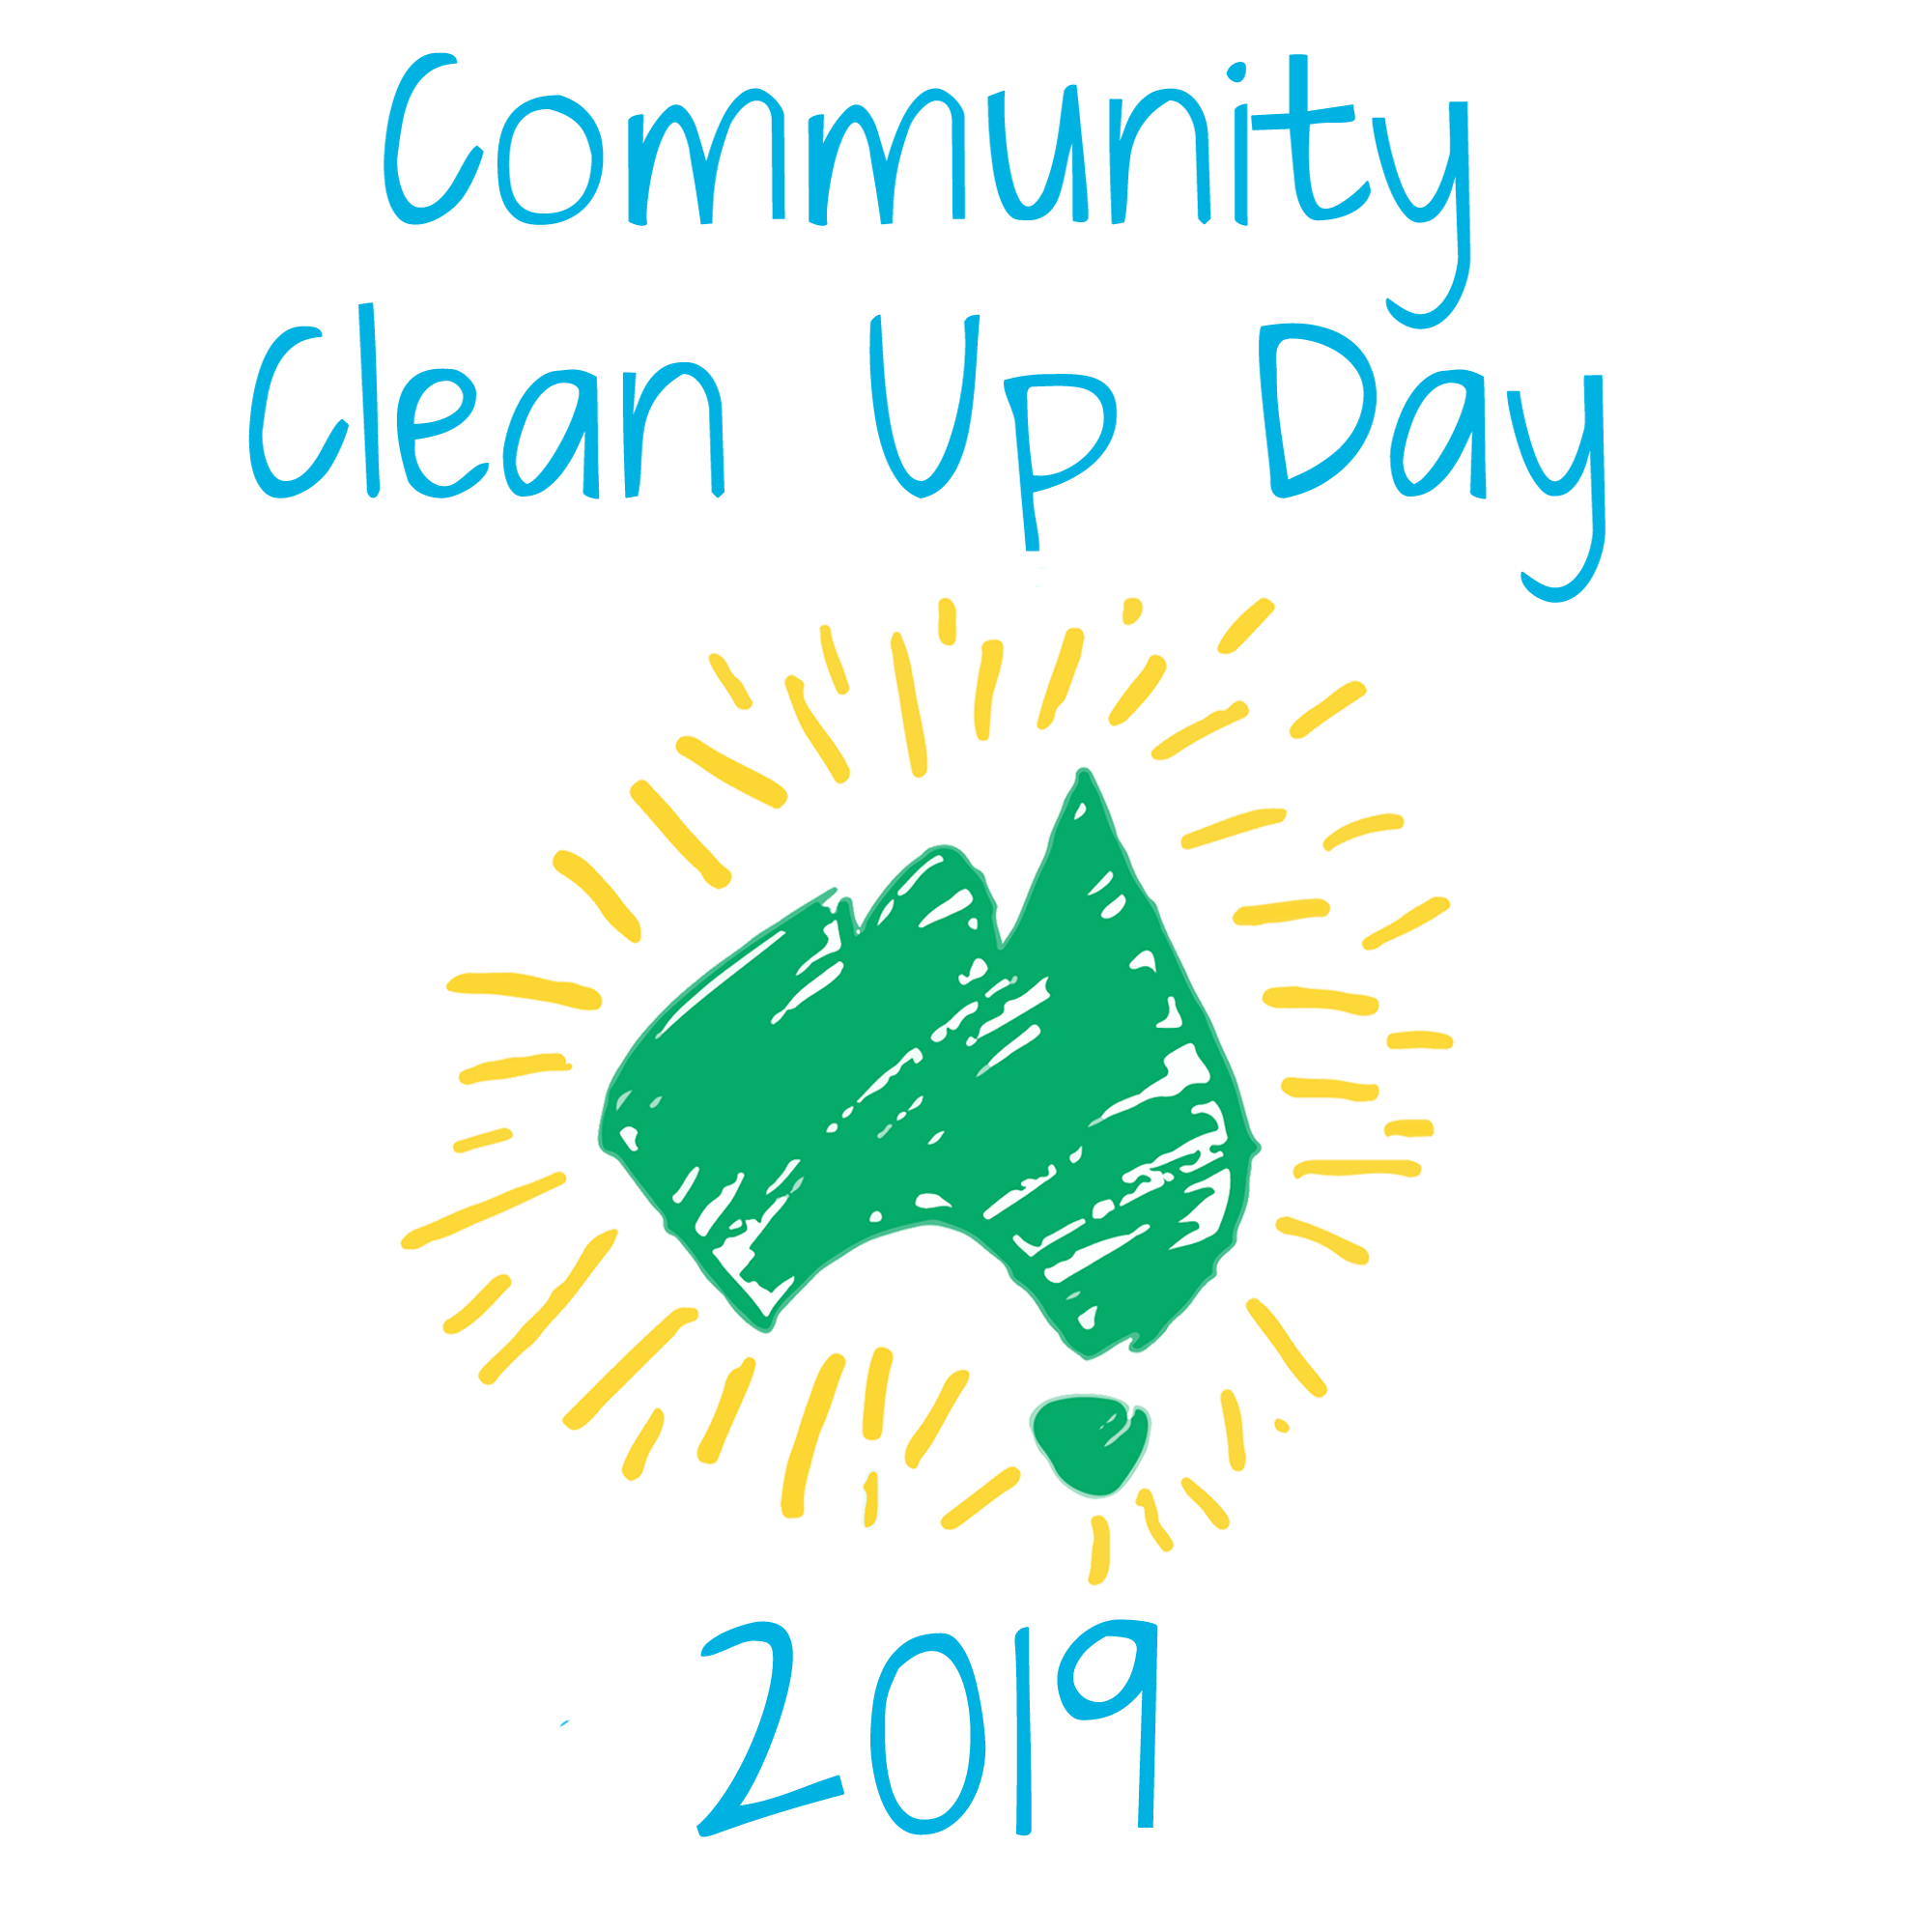 Cleaning up day. Clean up Day. Up up Day. Clean up Day Russia. Clean up Days pictures.